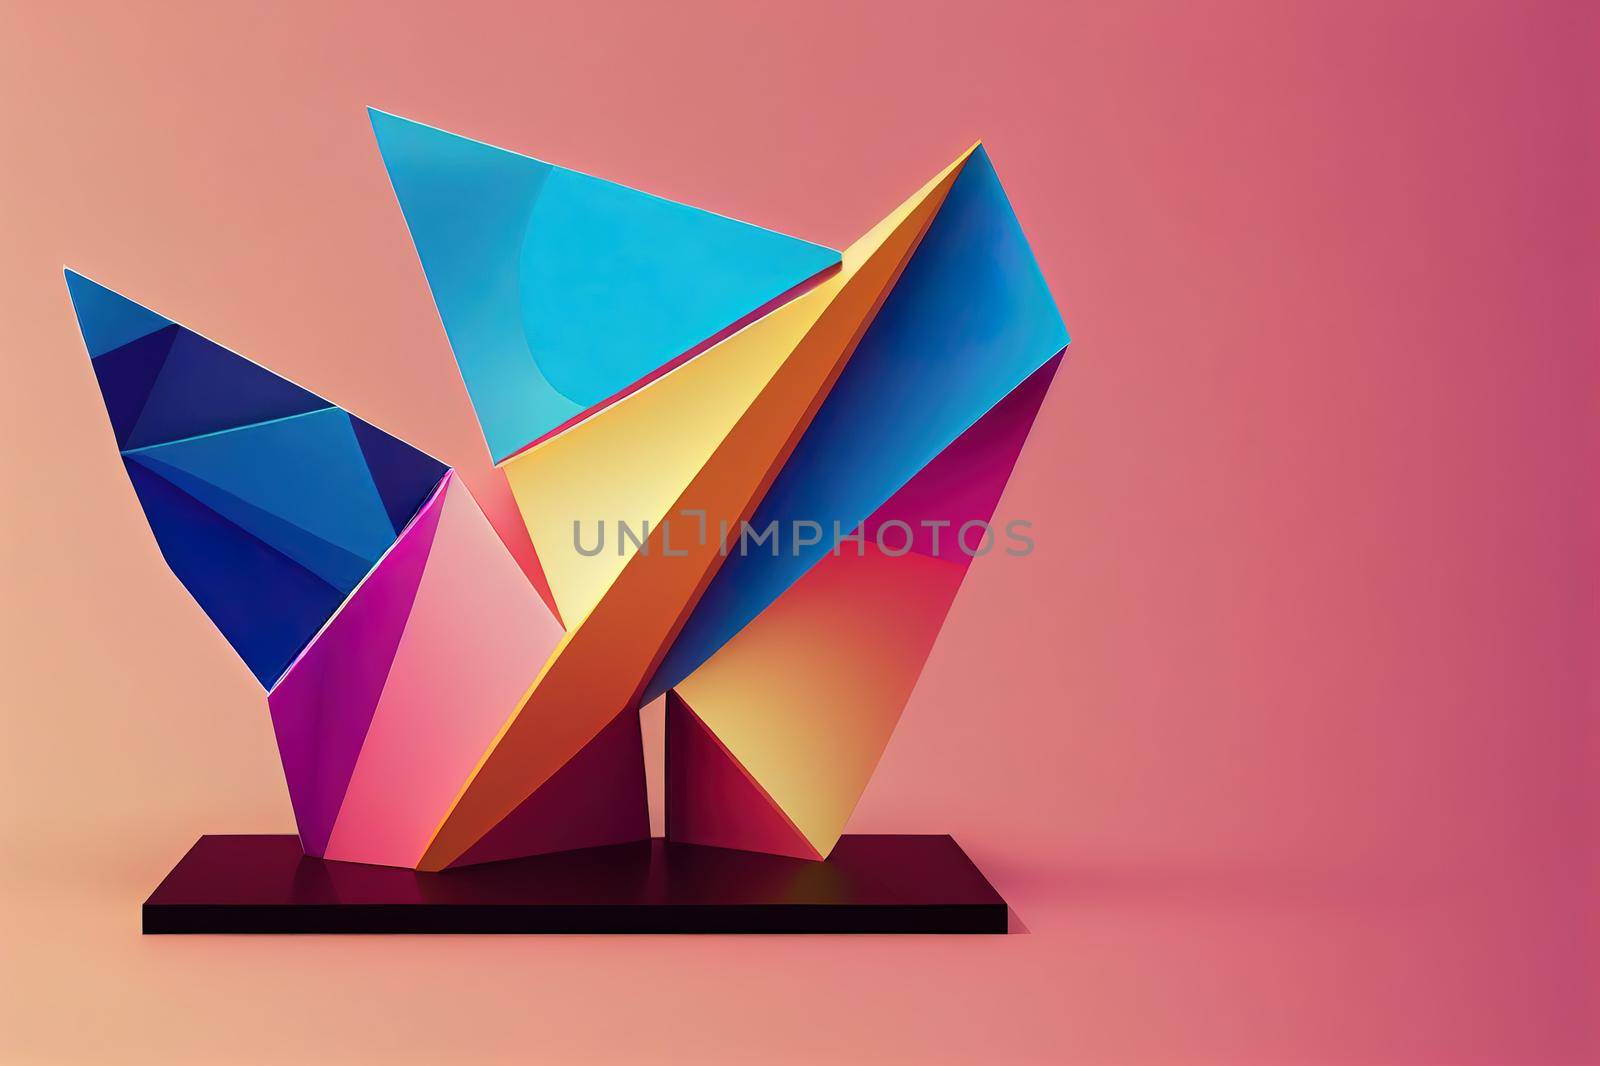 3D Abstract Minimal Scene with Geometric Forms Promotion Sale Product Display Product Presentation Mockup Cosmetics Product Display Podium Stage Pedestal or Platform